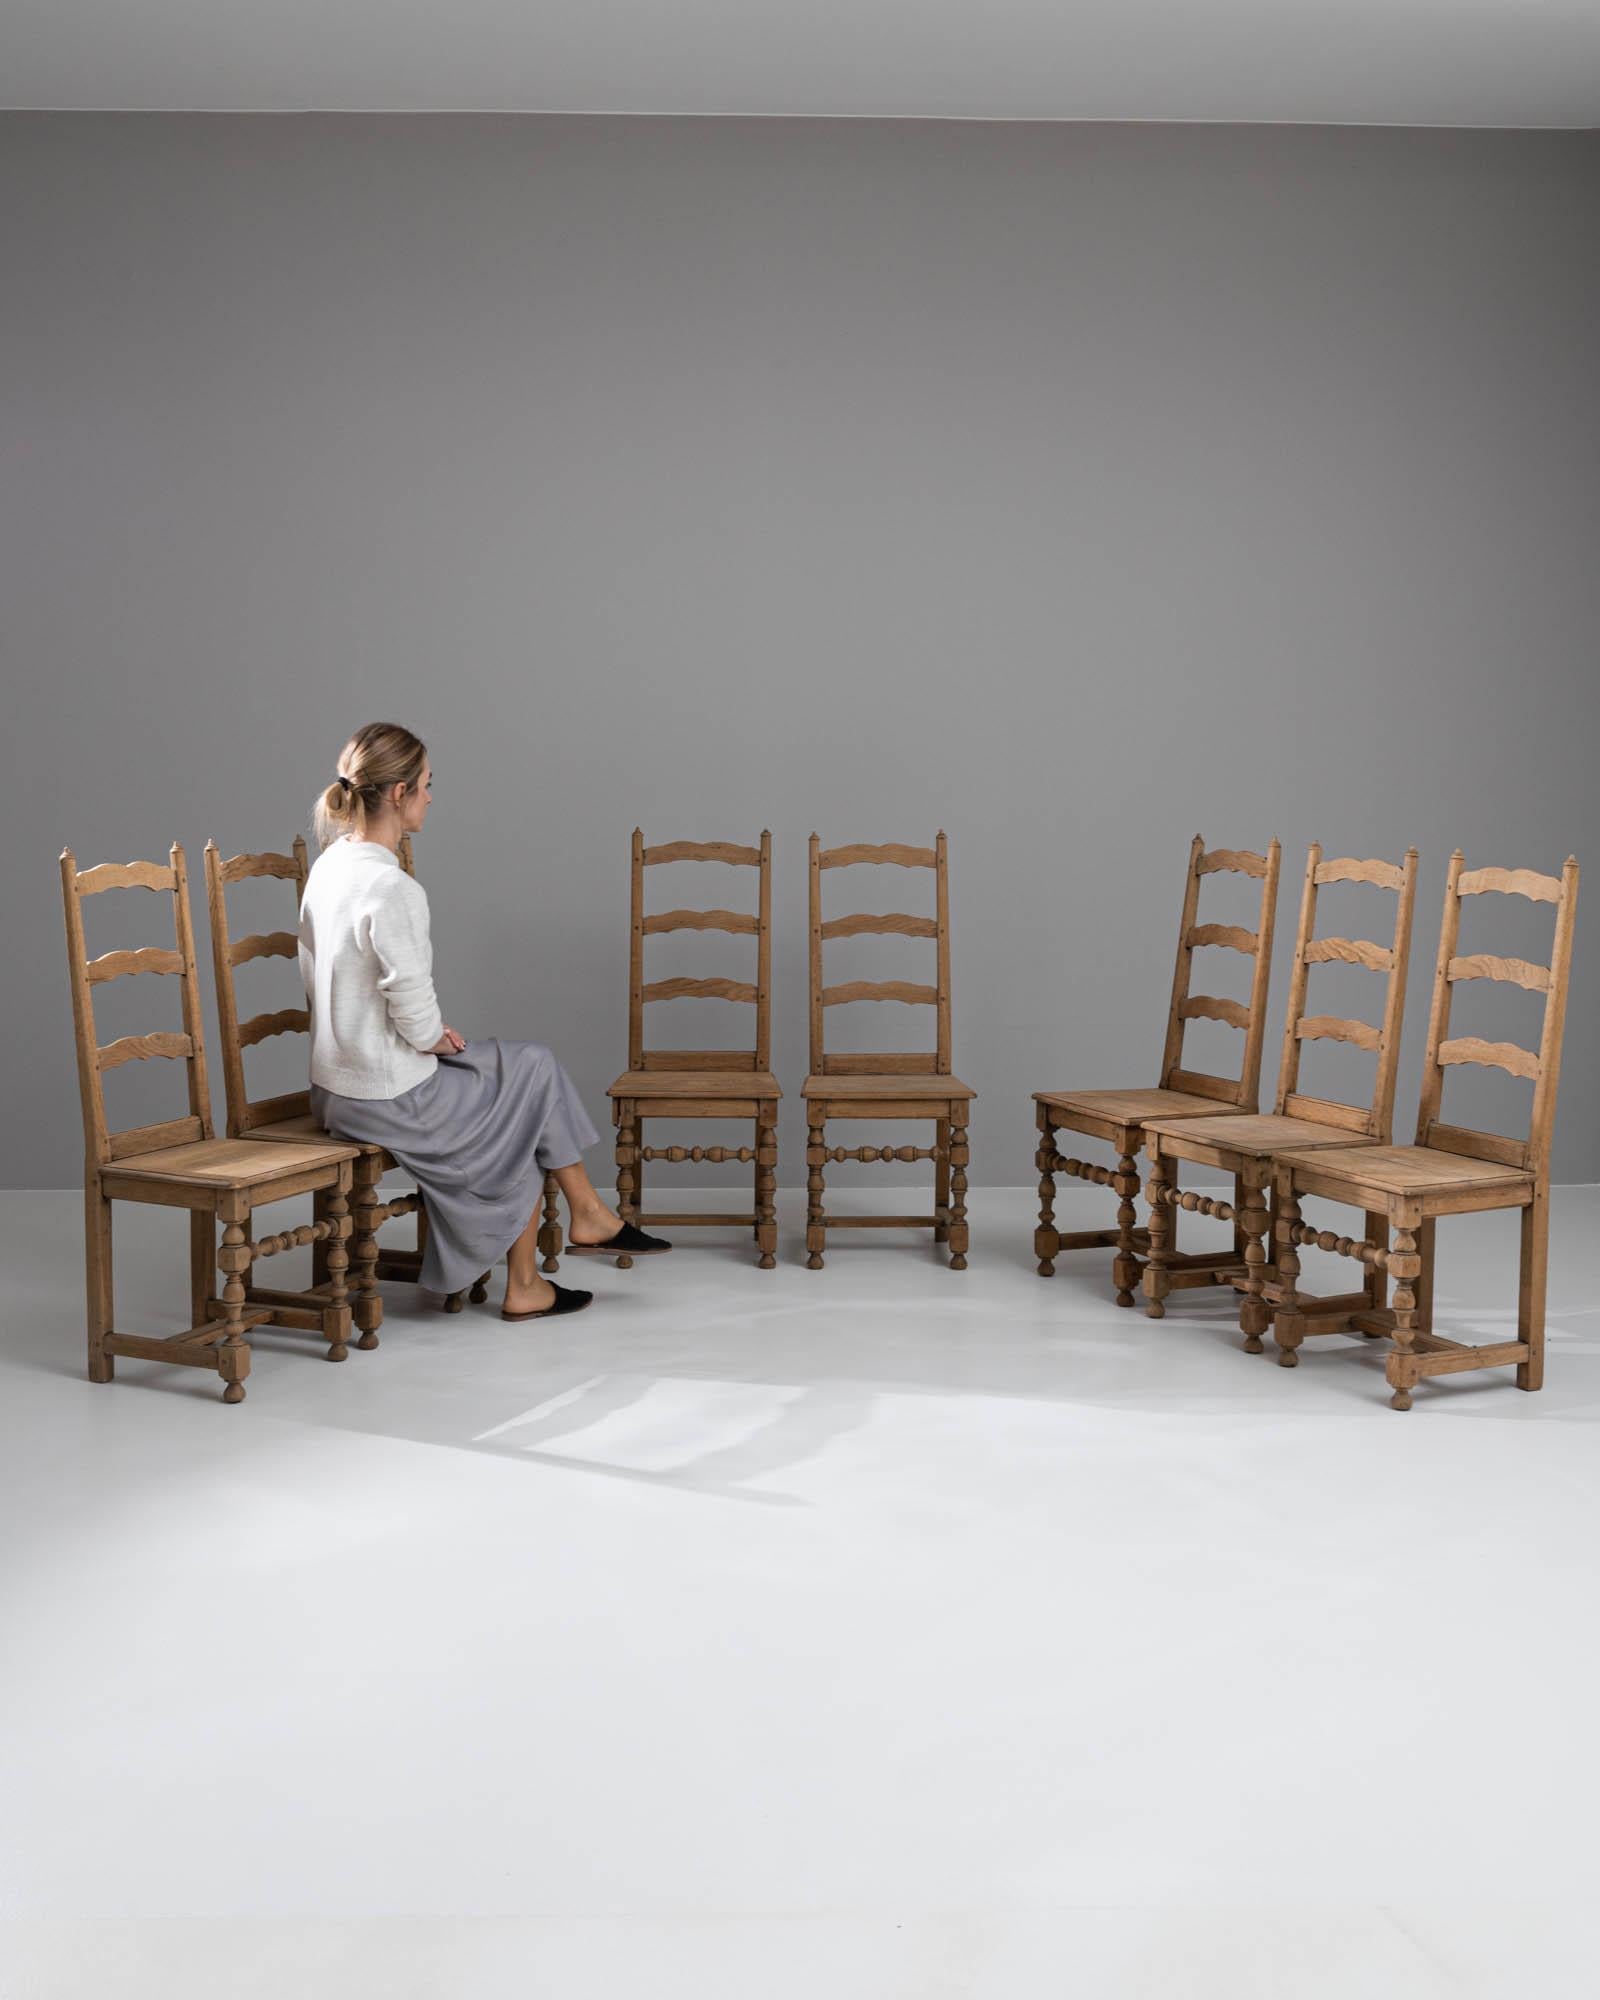 Introducing a set of eight Belgian Oak Dining Chairs, hailing from the 20th century, that speak volumes of robust elegance and rustic charm. Each chair stands tall with a commanding presence, the oak’s natural grain telling stories of decades past.